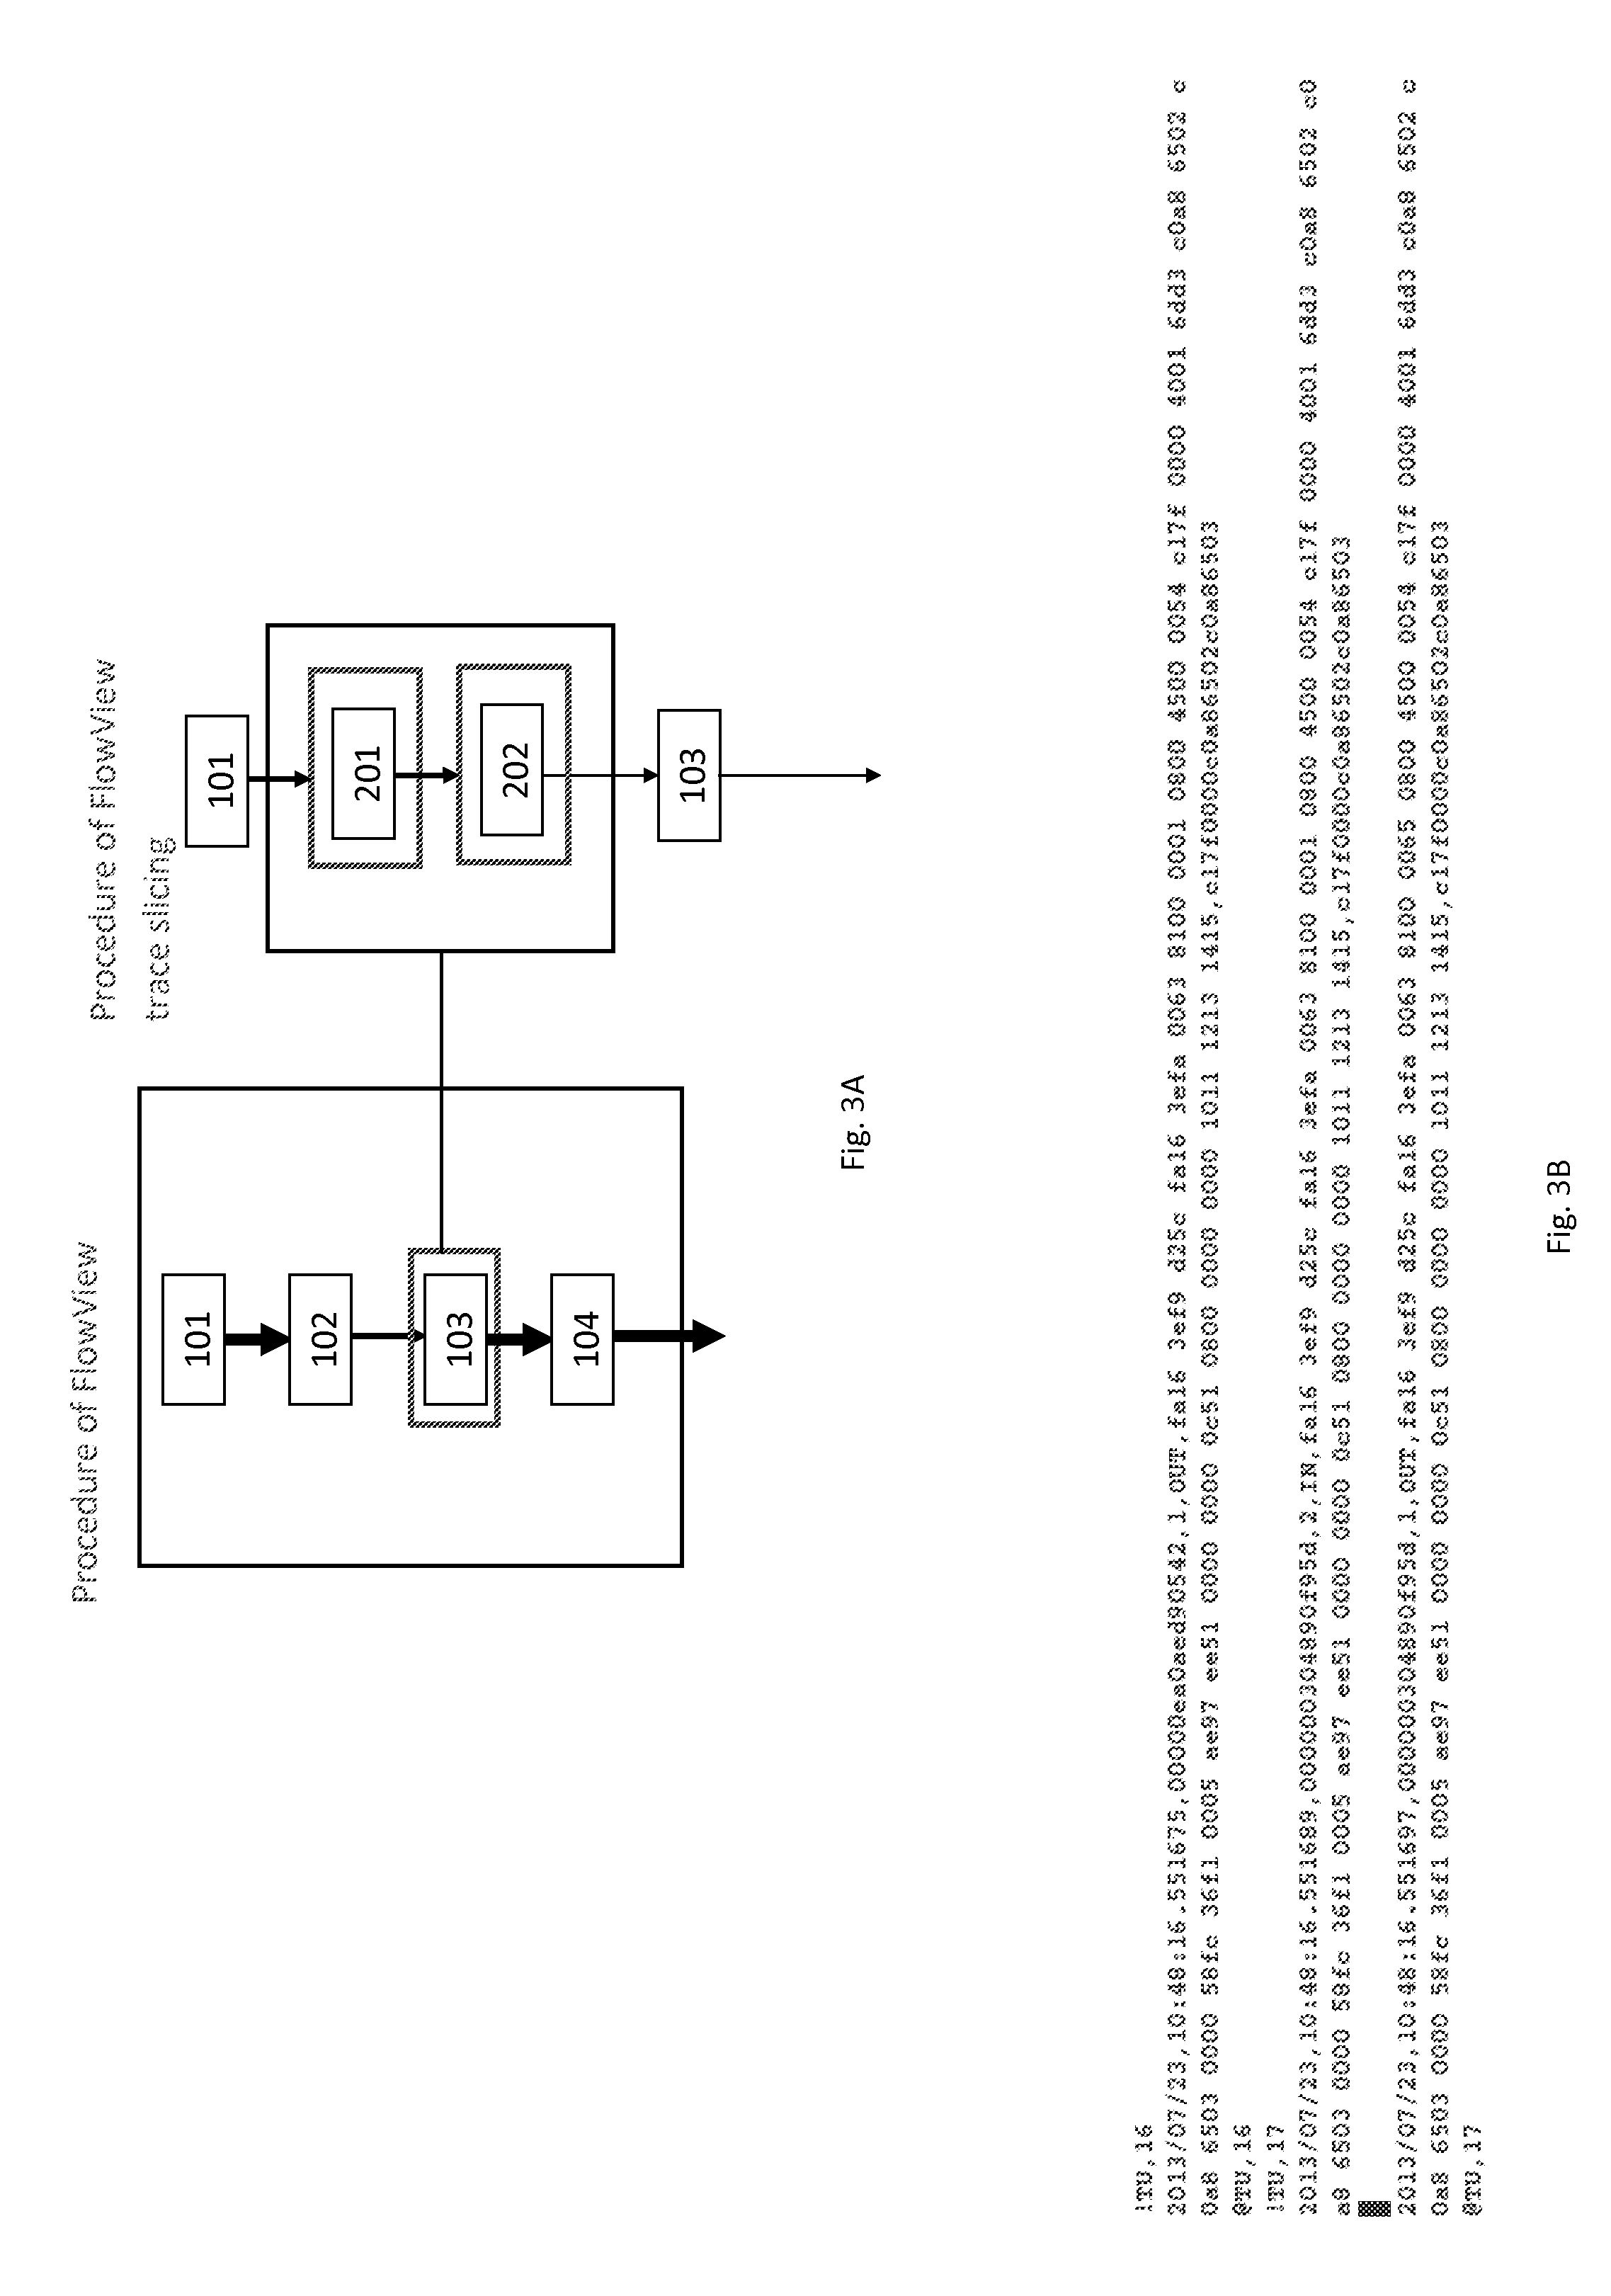 System and Method for Network Packet Event Characterization and Analysis